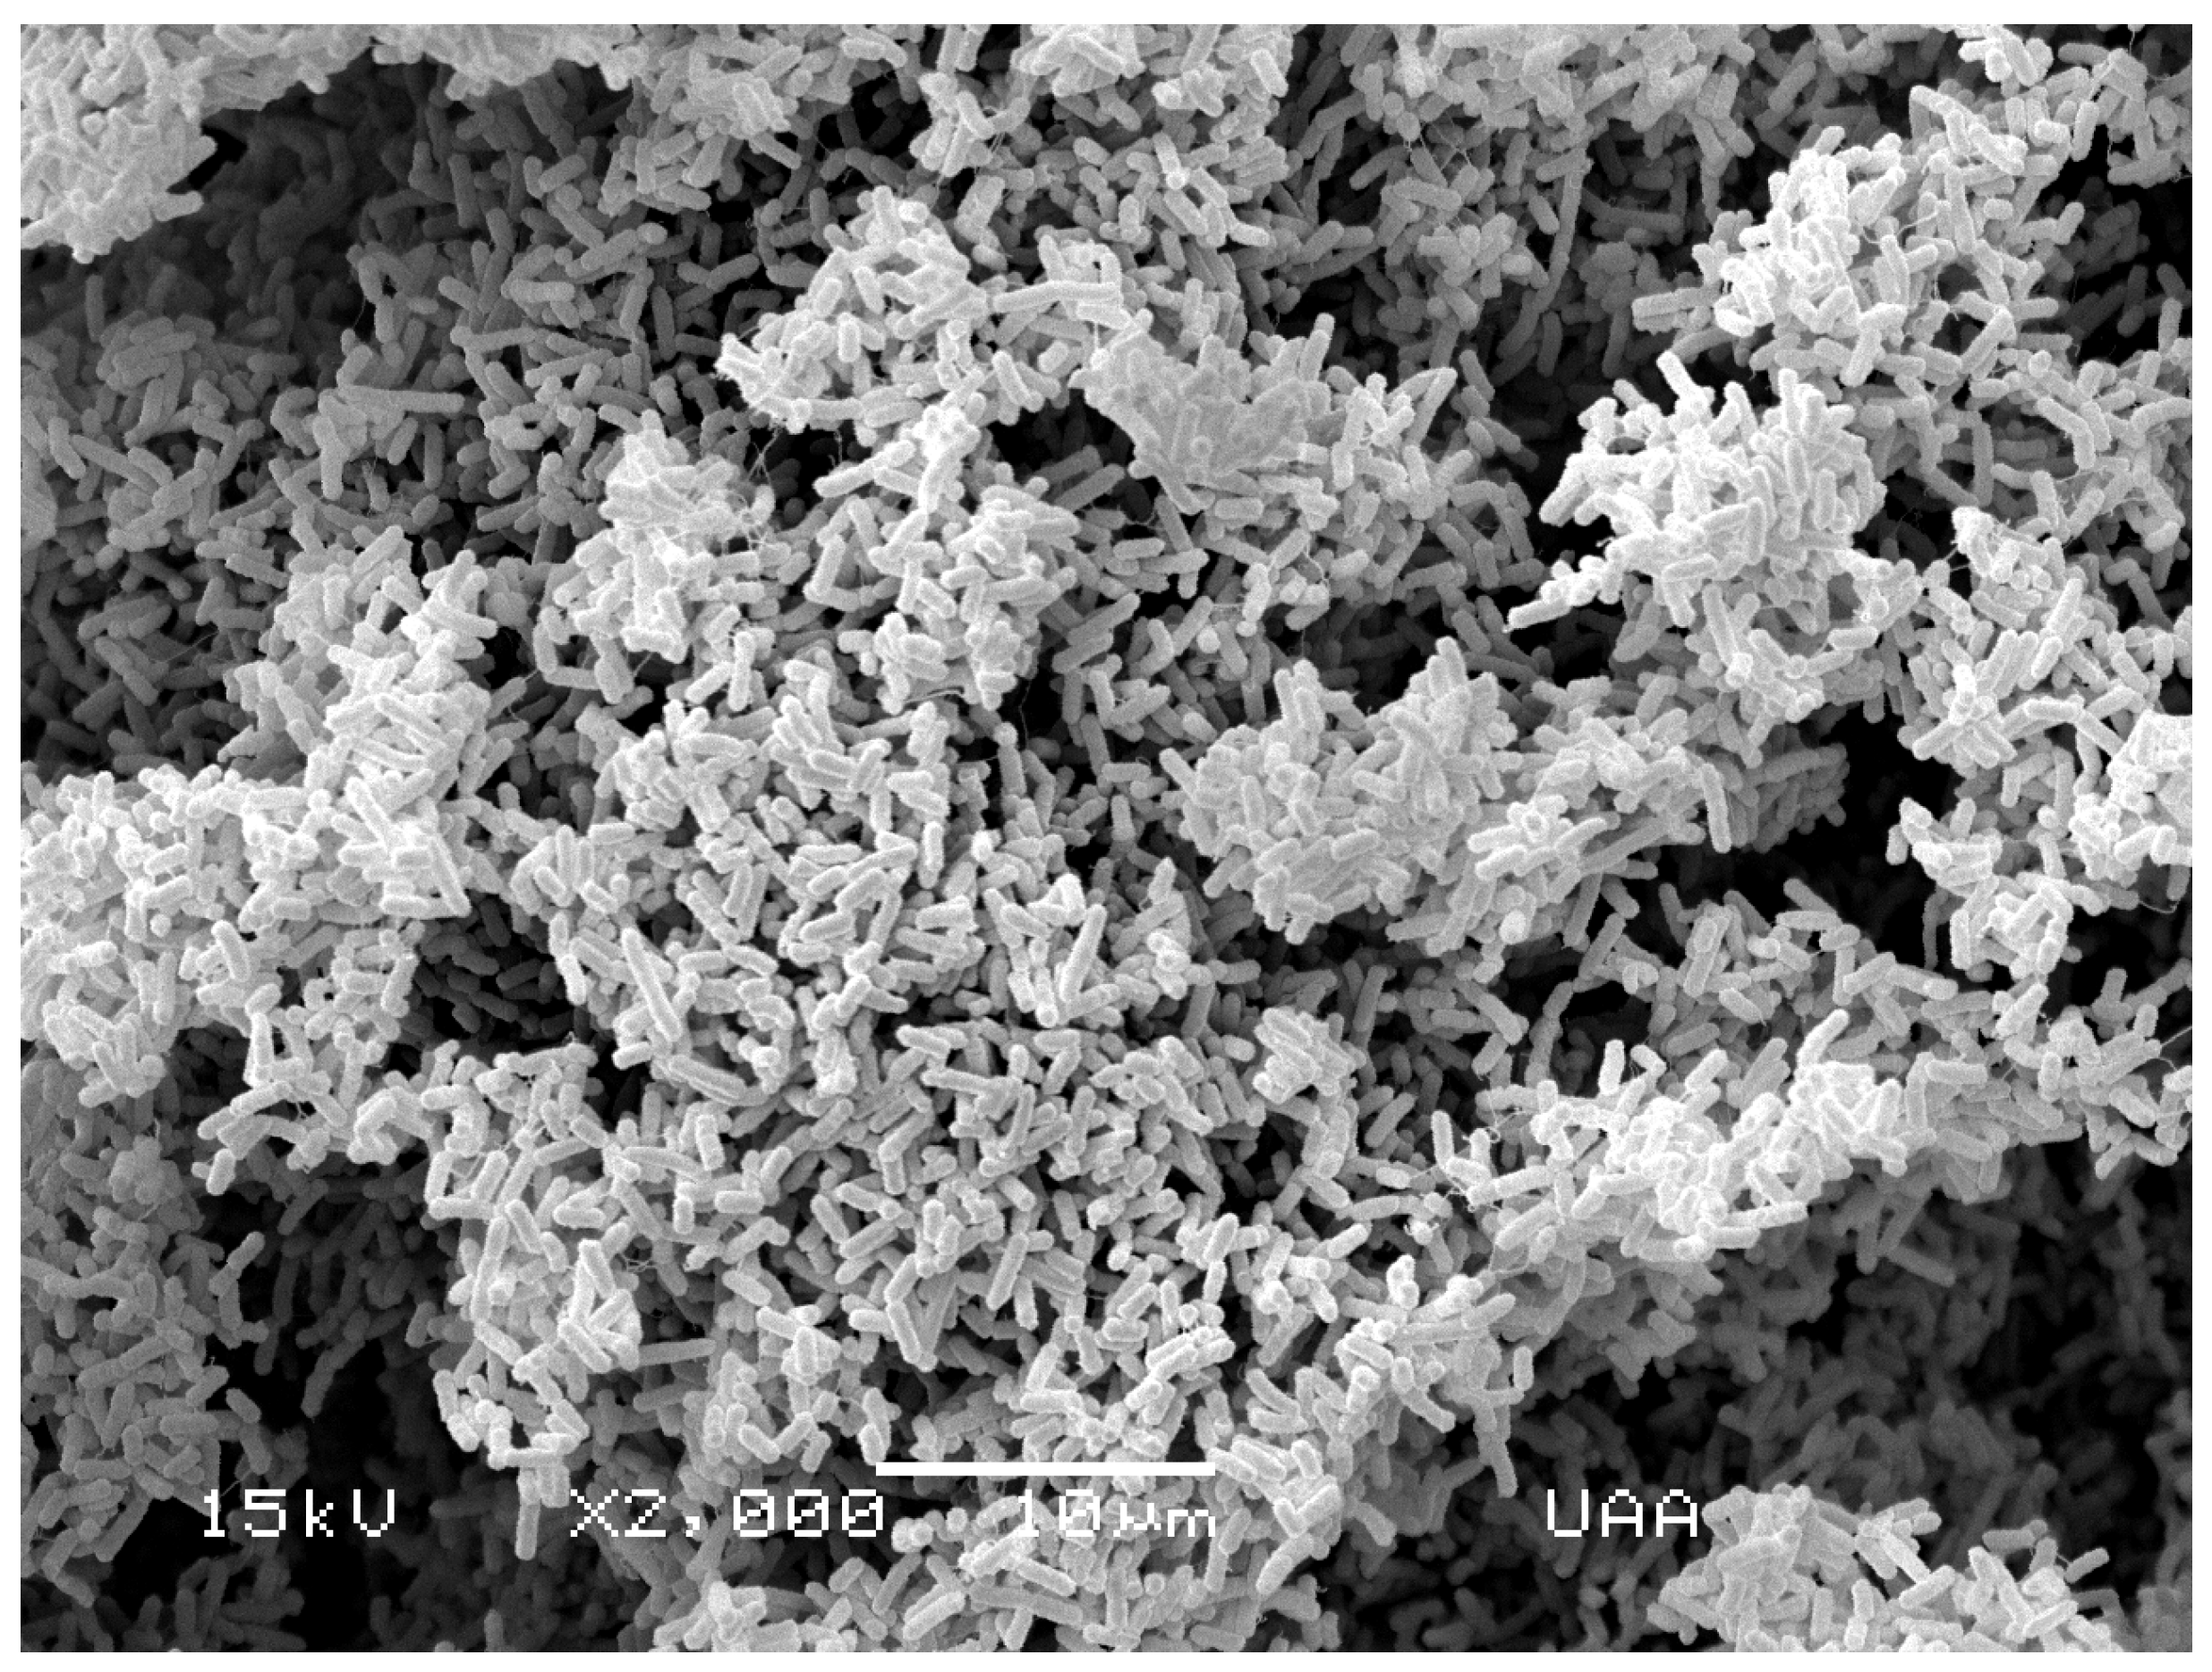 Scanning electron micrograph of E. coli isolated from river water, part of the mitigation of microbiological safety.